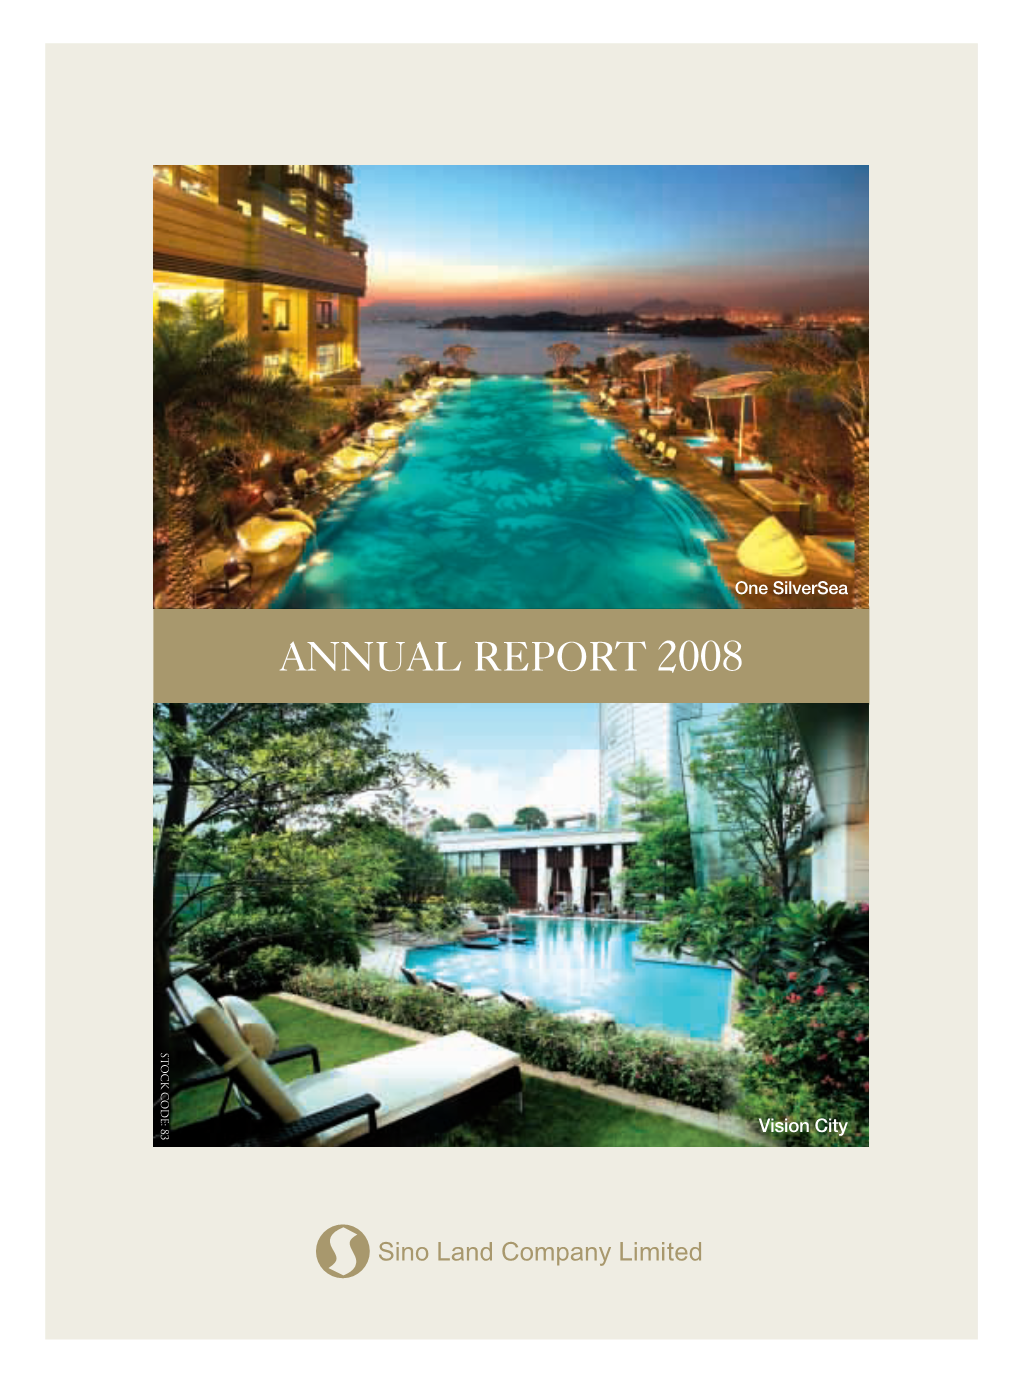 Sino Land Company Limited Annual Report 2008